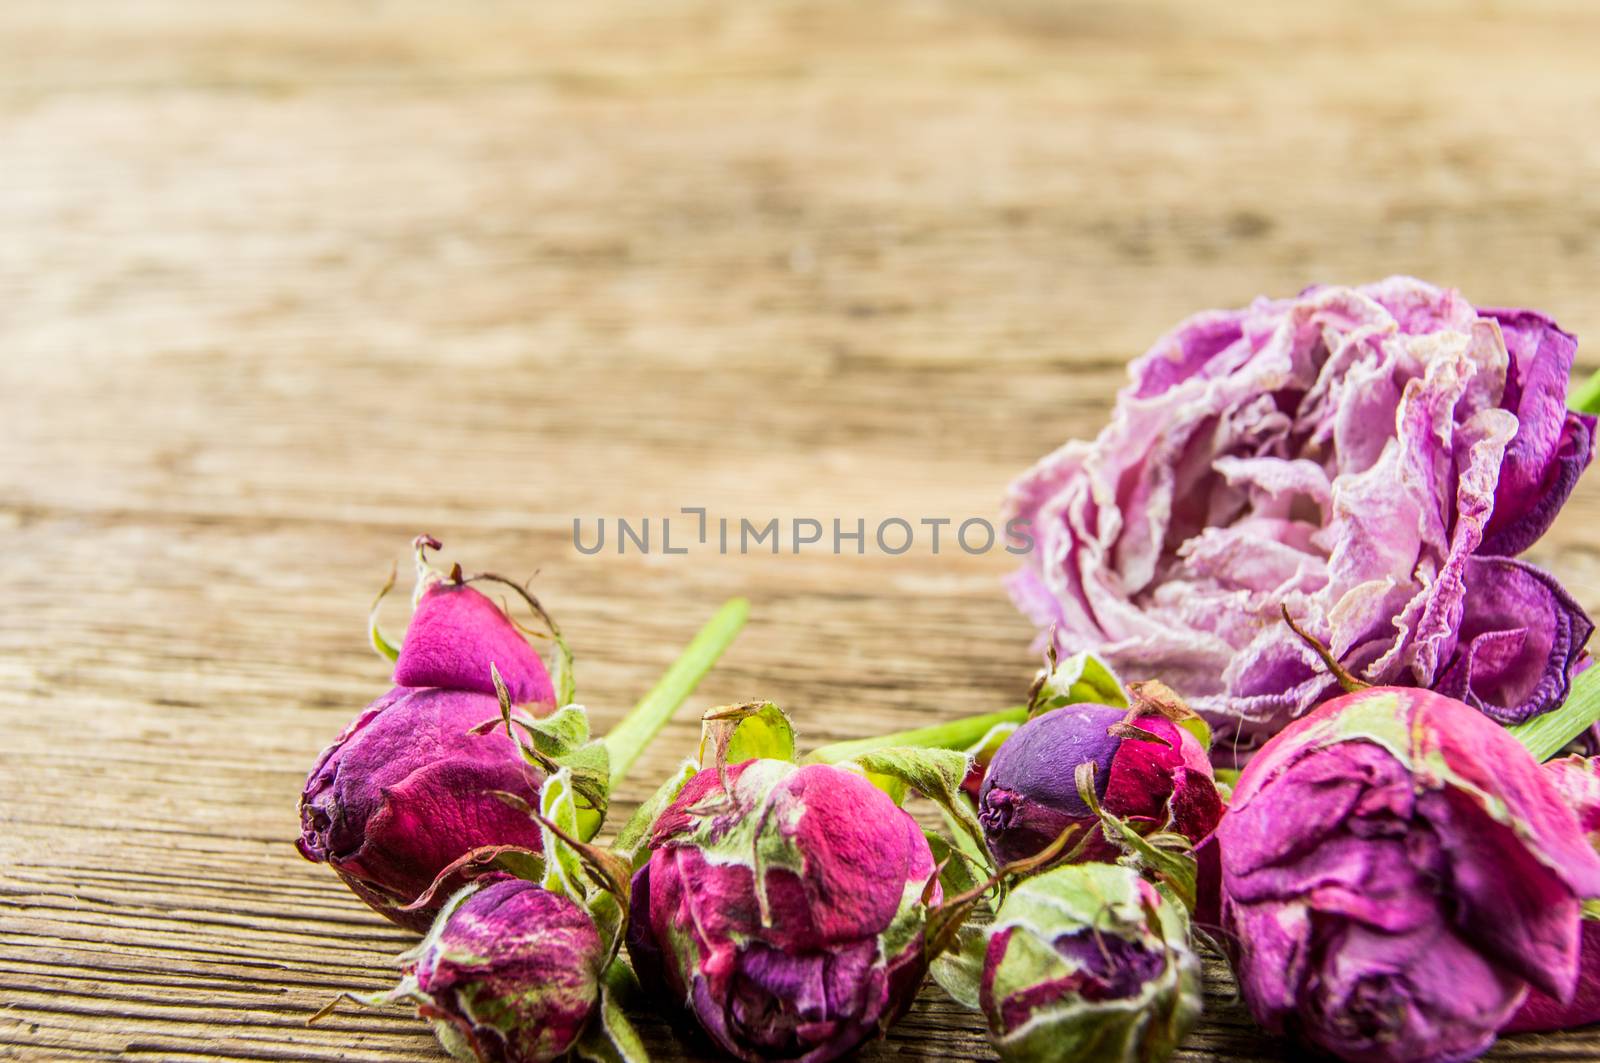 Red rose over wooden background. For your commercial and editorial use.